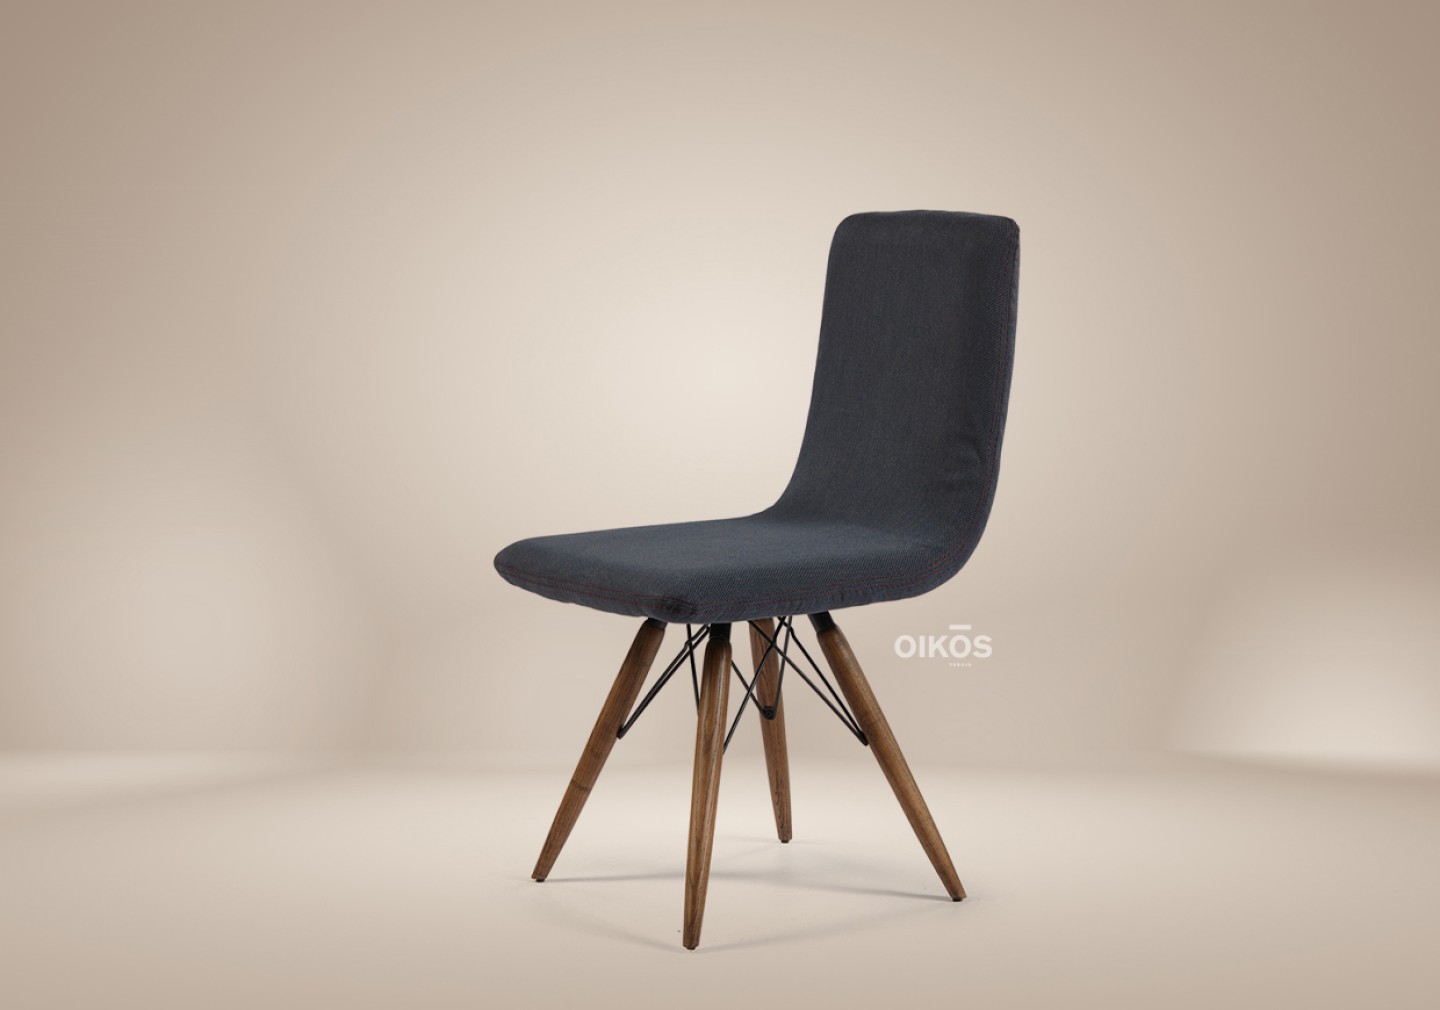 THE NEW DHAKA DINING CHAIR